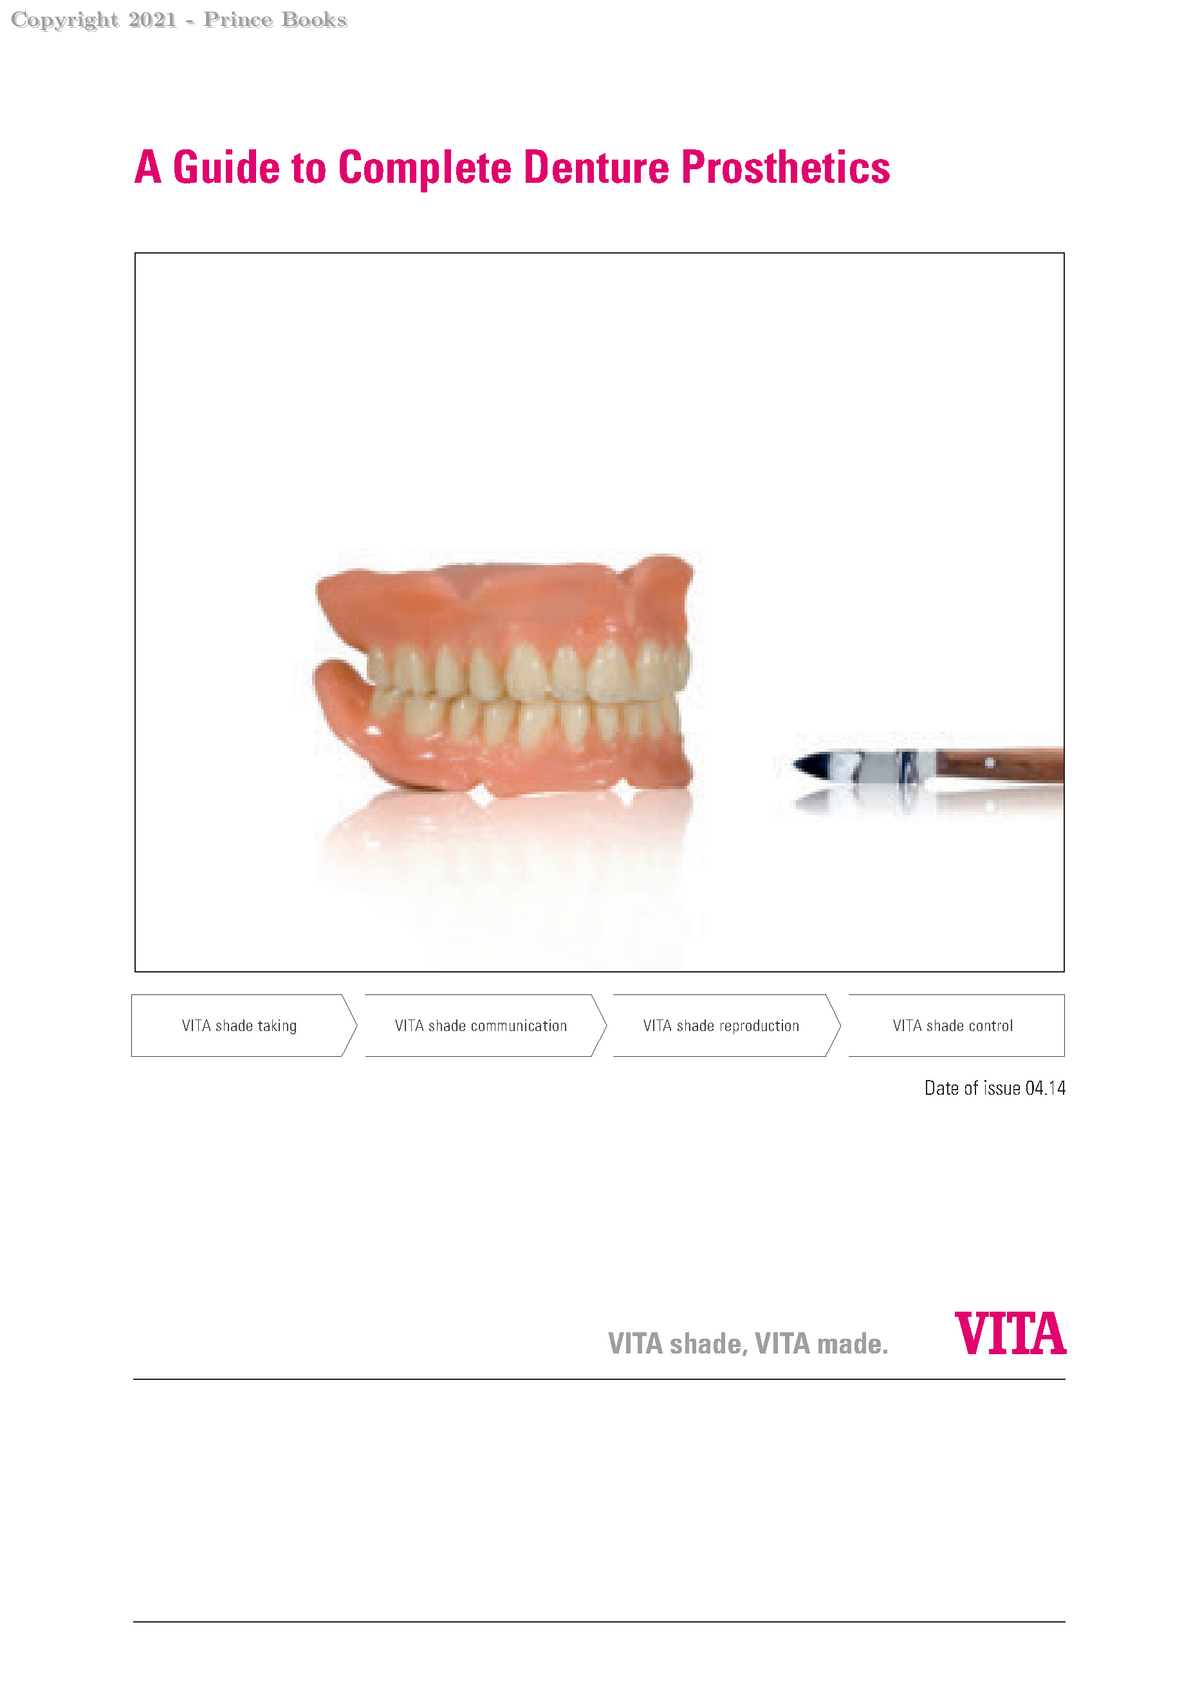 a Guide to Complete Denture Prosthetics